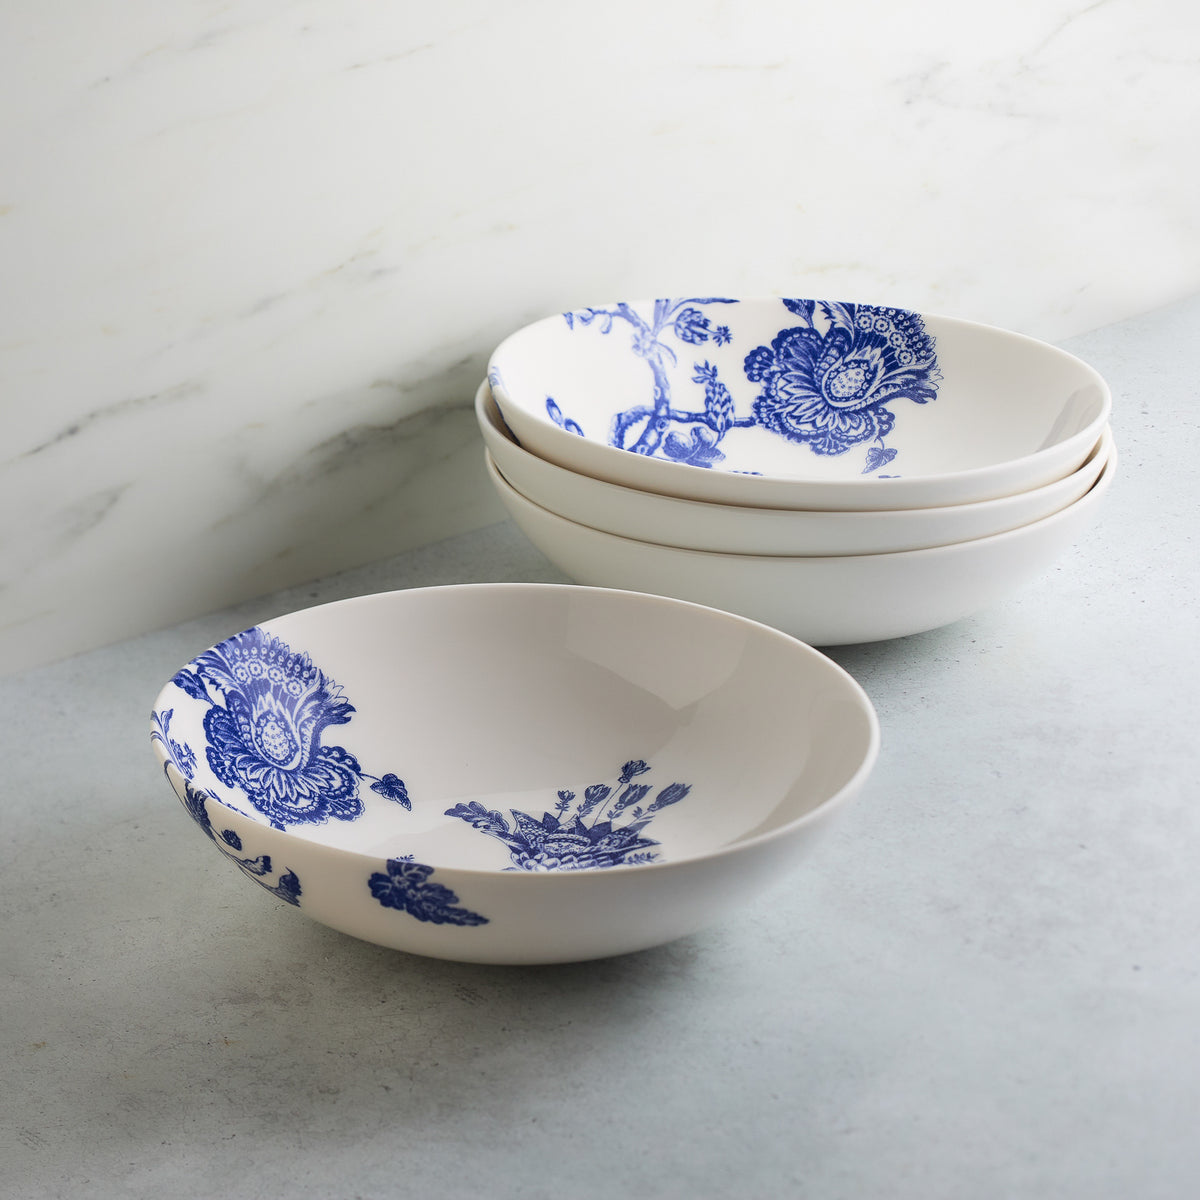 Four white ceramic bowls with blue floral patterns, crafted from premium Caskata Artisanal Home Arcadia Entrée Bowls. Three are stacked while one generous bowl is placed in front, all on a light gray surface with a white marble background. Inspired by the elegance of the Williamsburg Foundation.